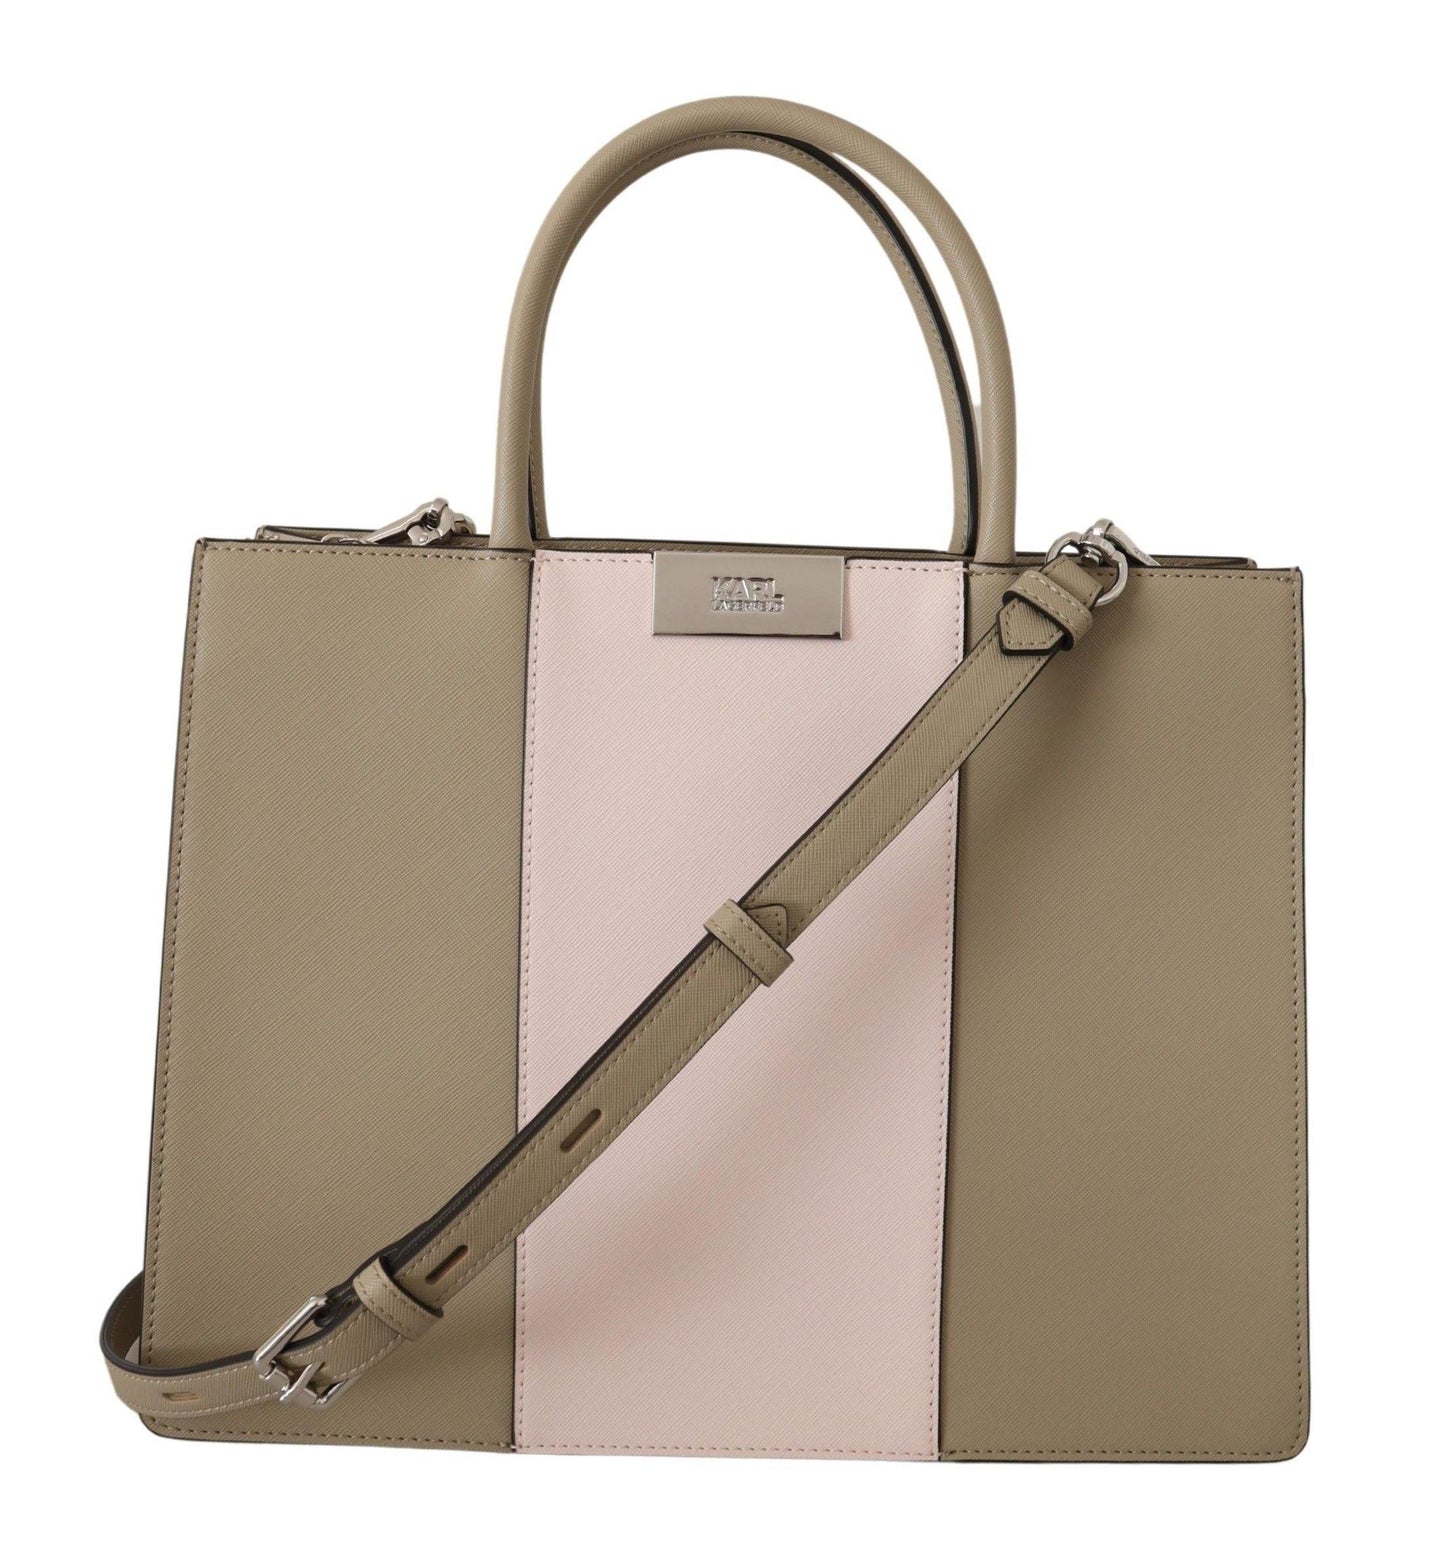 Karl Lagerfeld Sage Green Polyurethane Tote Shoulder Bag - Designed by Karl Lagerfeld Available to Buy at a Discounted Price on Moon Behind The Hill Online Designer Discount Store